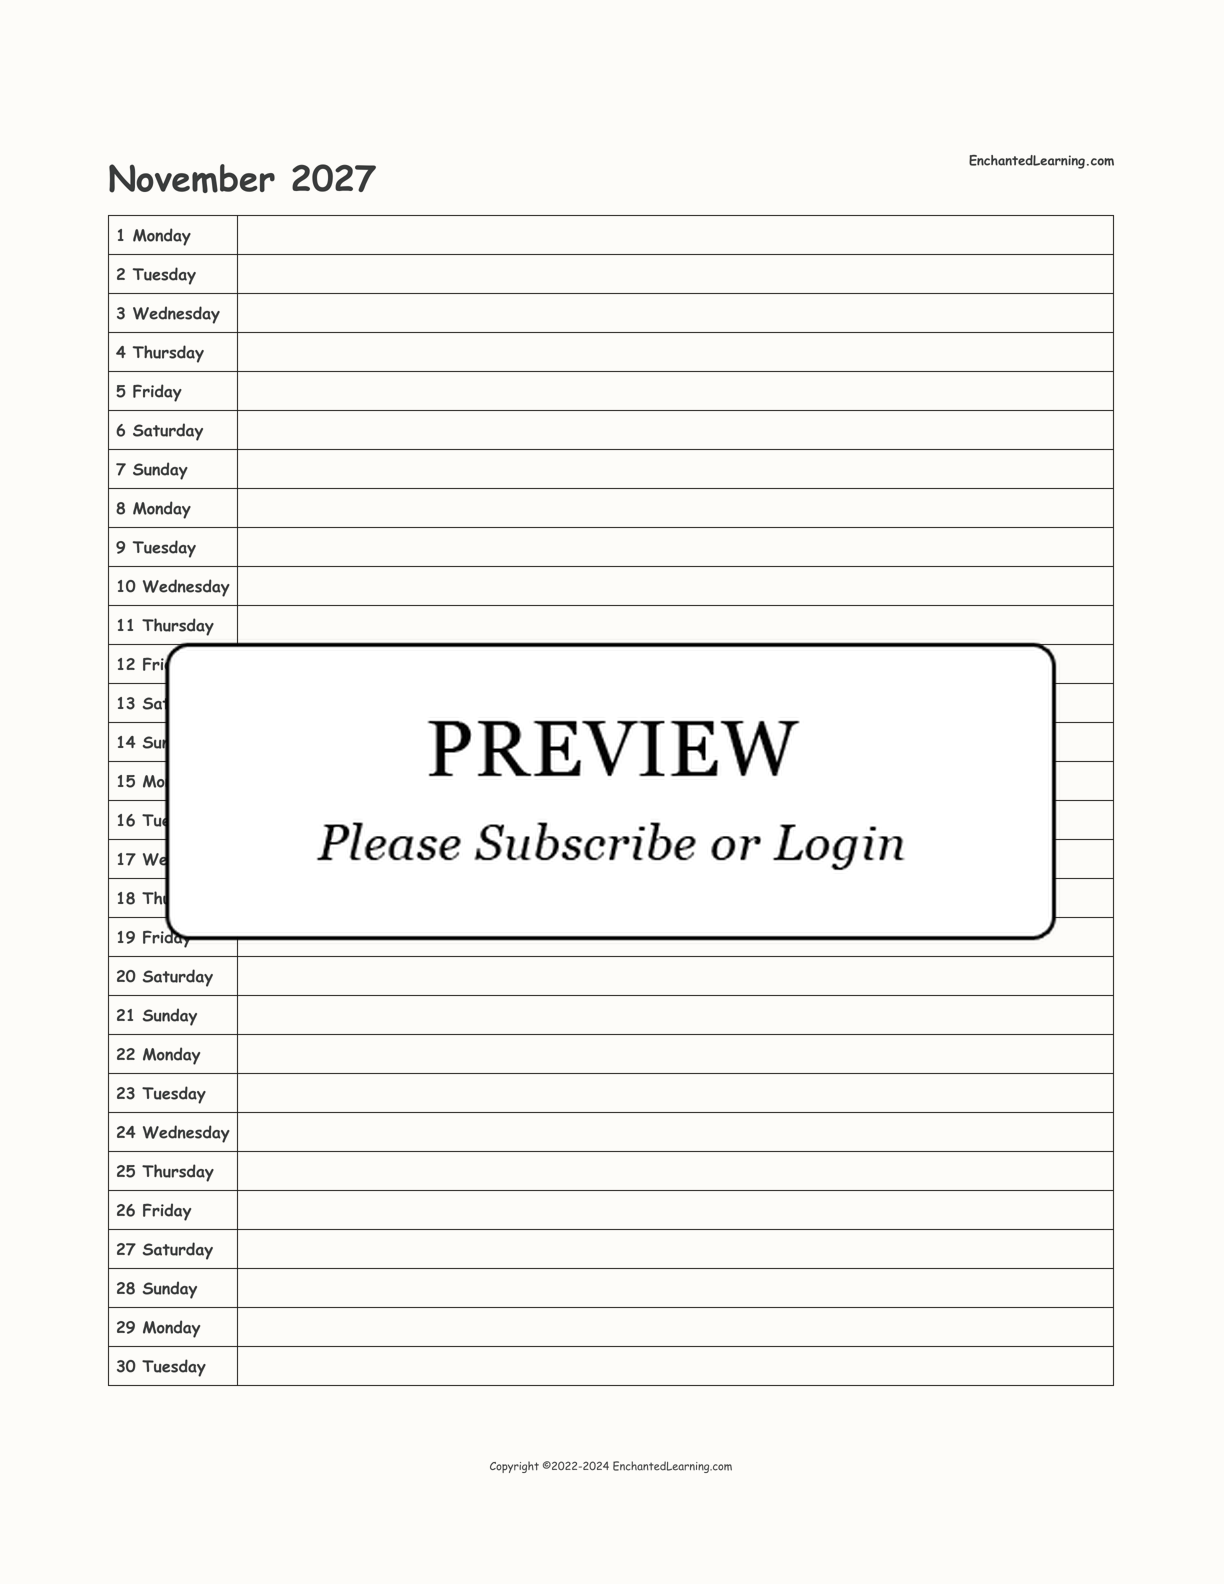 2027 Scheduling Calendar interactive printout page 11